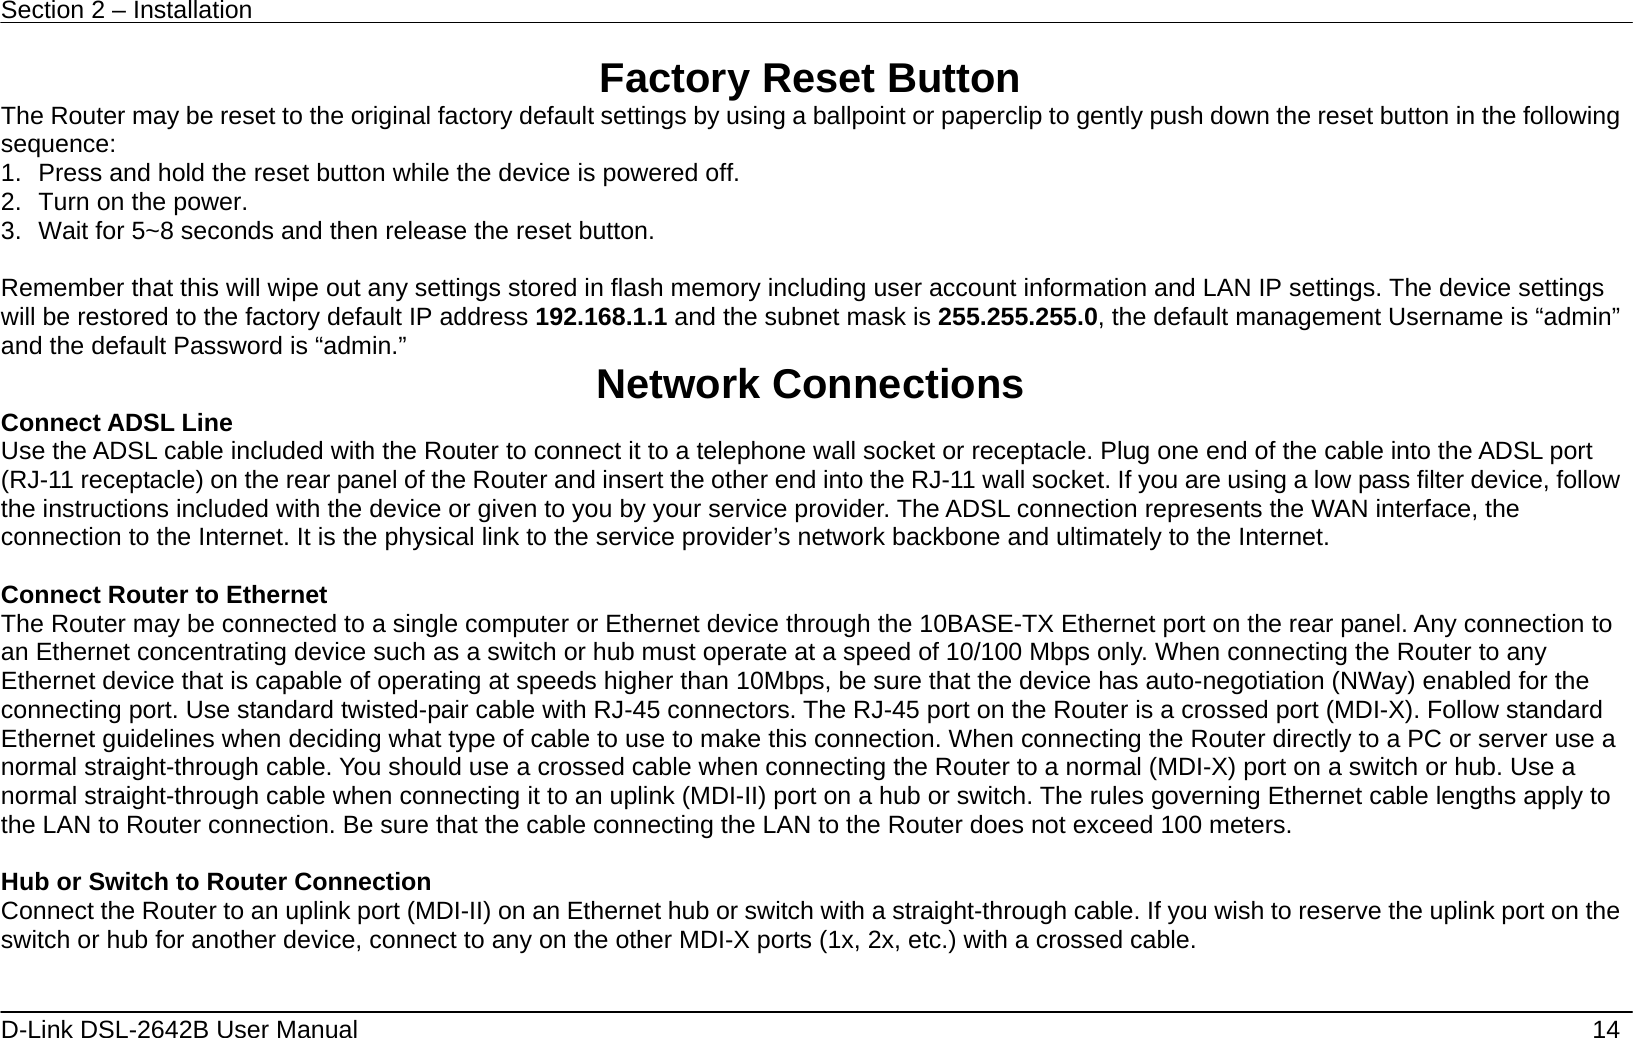 Section 2 – Installation   D-Link DSL-2642B User Manual    14 Factory Reset Button The Router may be reset to the original factory default settings by using a ballpoint or paperclip to gently push down the reset button in the following sequence:  1.  Press and hold the reset button while the device is powered off. 2.  Turn on the power. 3.  Wait for 5~8 seconds and then release the reset button.    Remember that this will wipe out any settings stored in flash memory including user account information and LAN IP settings. The device settings will be restored to the factory default IP address 192.168.1.1 and the subnet mask is 255.255.255.0, the default management Username is “admin” and the default Password is “admin.”  Network Connections   Connect ADSL Line Use the ADSL cable included with the Router to connect it to a telephone wall socket or receptacle. Plug one end of the cable into the ADSL port (RJ-11 receptacle) on the rear panel of the Router and insert the other end into the RJ-11 wall socket. If you are using a low pass filter device, follow the instructions included with the device or given to you by your service provider. The ADSL connection represents the WAN interface, the connection to the Internet. It is the physical link to the service provider’s network backbone and ultimately to the Internet.    Connect Router to Ethernet   The Router may be connected to a single computer or Ethernet device through the 10BASE-TX Ethernet port on the rear panel. Any connection to an Ethernet concentrating device such as a switch or hub must operate at a speed of 10/100 Mbps only. When connecting the Router to any Ethernet device that is capable of operating at speeds higher than 10Mbps, be sure that the device has auto-negotiation (NWay) enabled for the connecting port. Use standard twisted-pair cable with RJ-45 connectors. The RJ-45 port on the Router is a crossed port (MDI-X). Follow standard Ethernet guidelines when deciding what type of cable to use to make this connection. When connecting the Router directly to a PC or server use a normal straight-through cable. You should use a crossed cable when connecting the Router to a normal (MDI-X) port on a switch or hub. Use a normal straight-through cable when connecting it to an uplink (MDI-II) port on a hub or switch. The rules governing Ethernet cable lengths apply to the LAN to Router connection. Be sure that the cable connecting the LAN to the Router does not exceed 100 meters.  Hub or Switch to Router Connection Connect the Router to an uplink port (MDI-II) on an Ethernet hub or switch with a straight-through cable. If you wish to reserve the uplink port on the switch or hub for another device, connect to any on the other MDI-X ports (1x, 2x, etc.) with a crossed cable.   